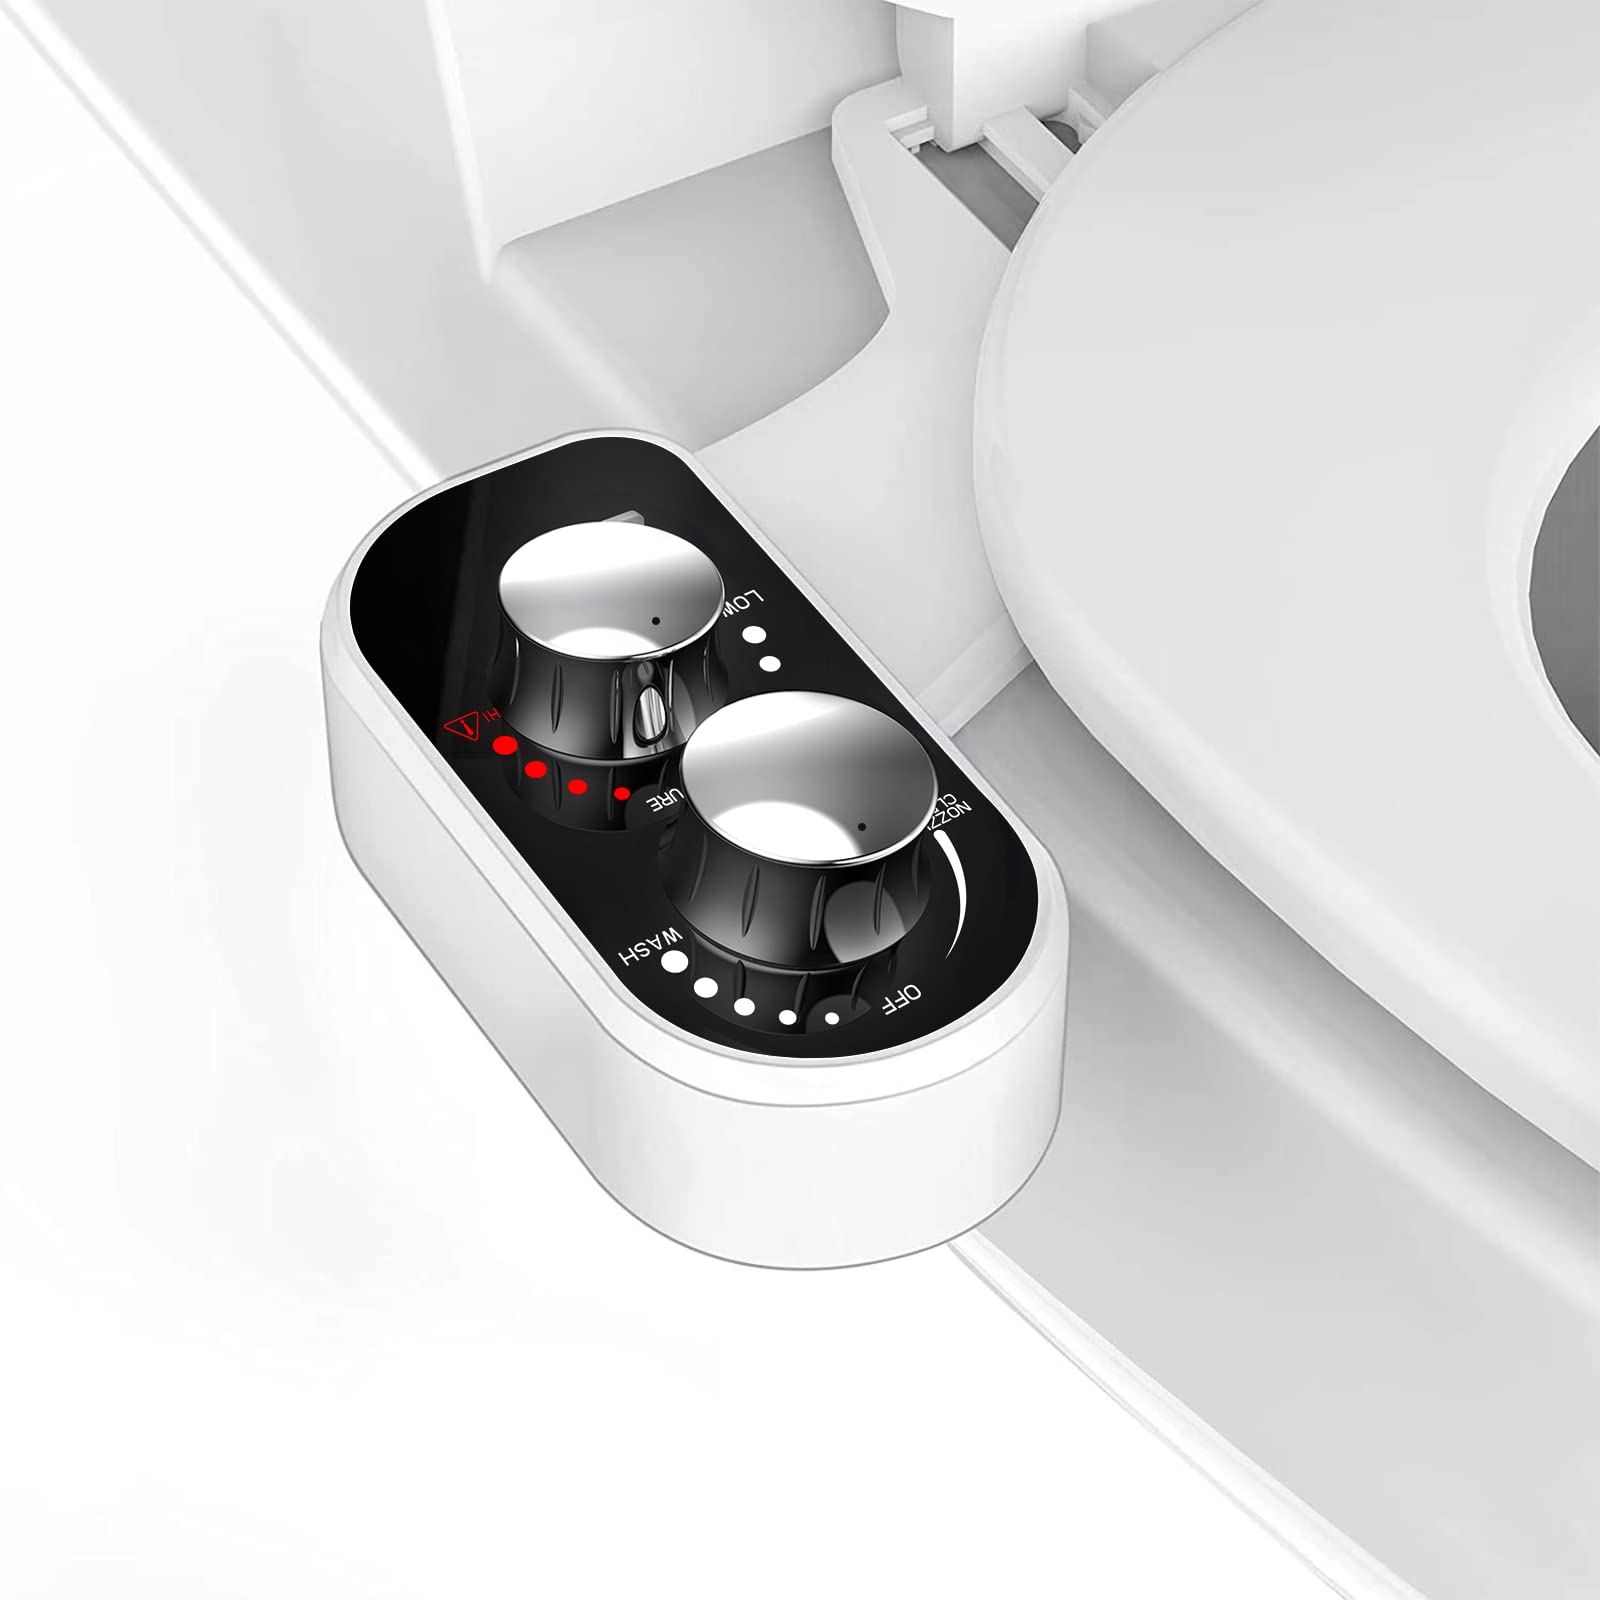 DooLv Bidet Attachment For Toilet Warm Water, Ultra-Slim Bidet Attachment Hot And Cold, Non-Electric Adjustable Pressure Self Cleaning